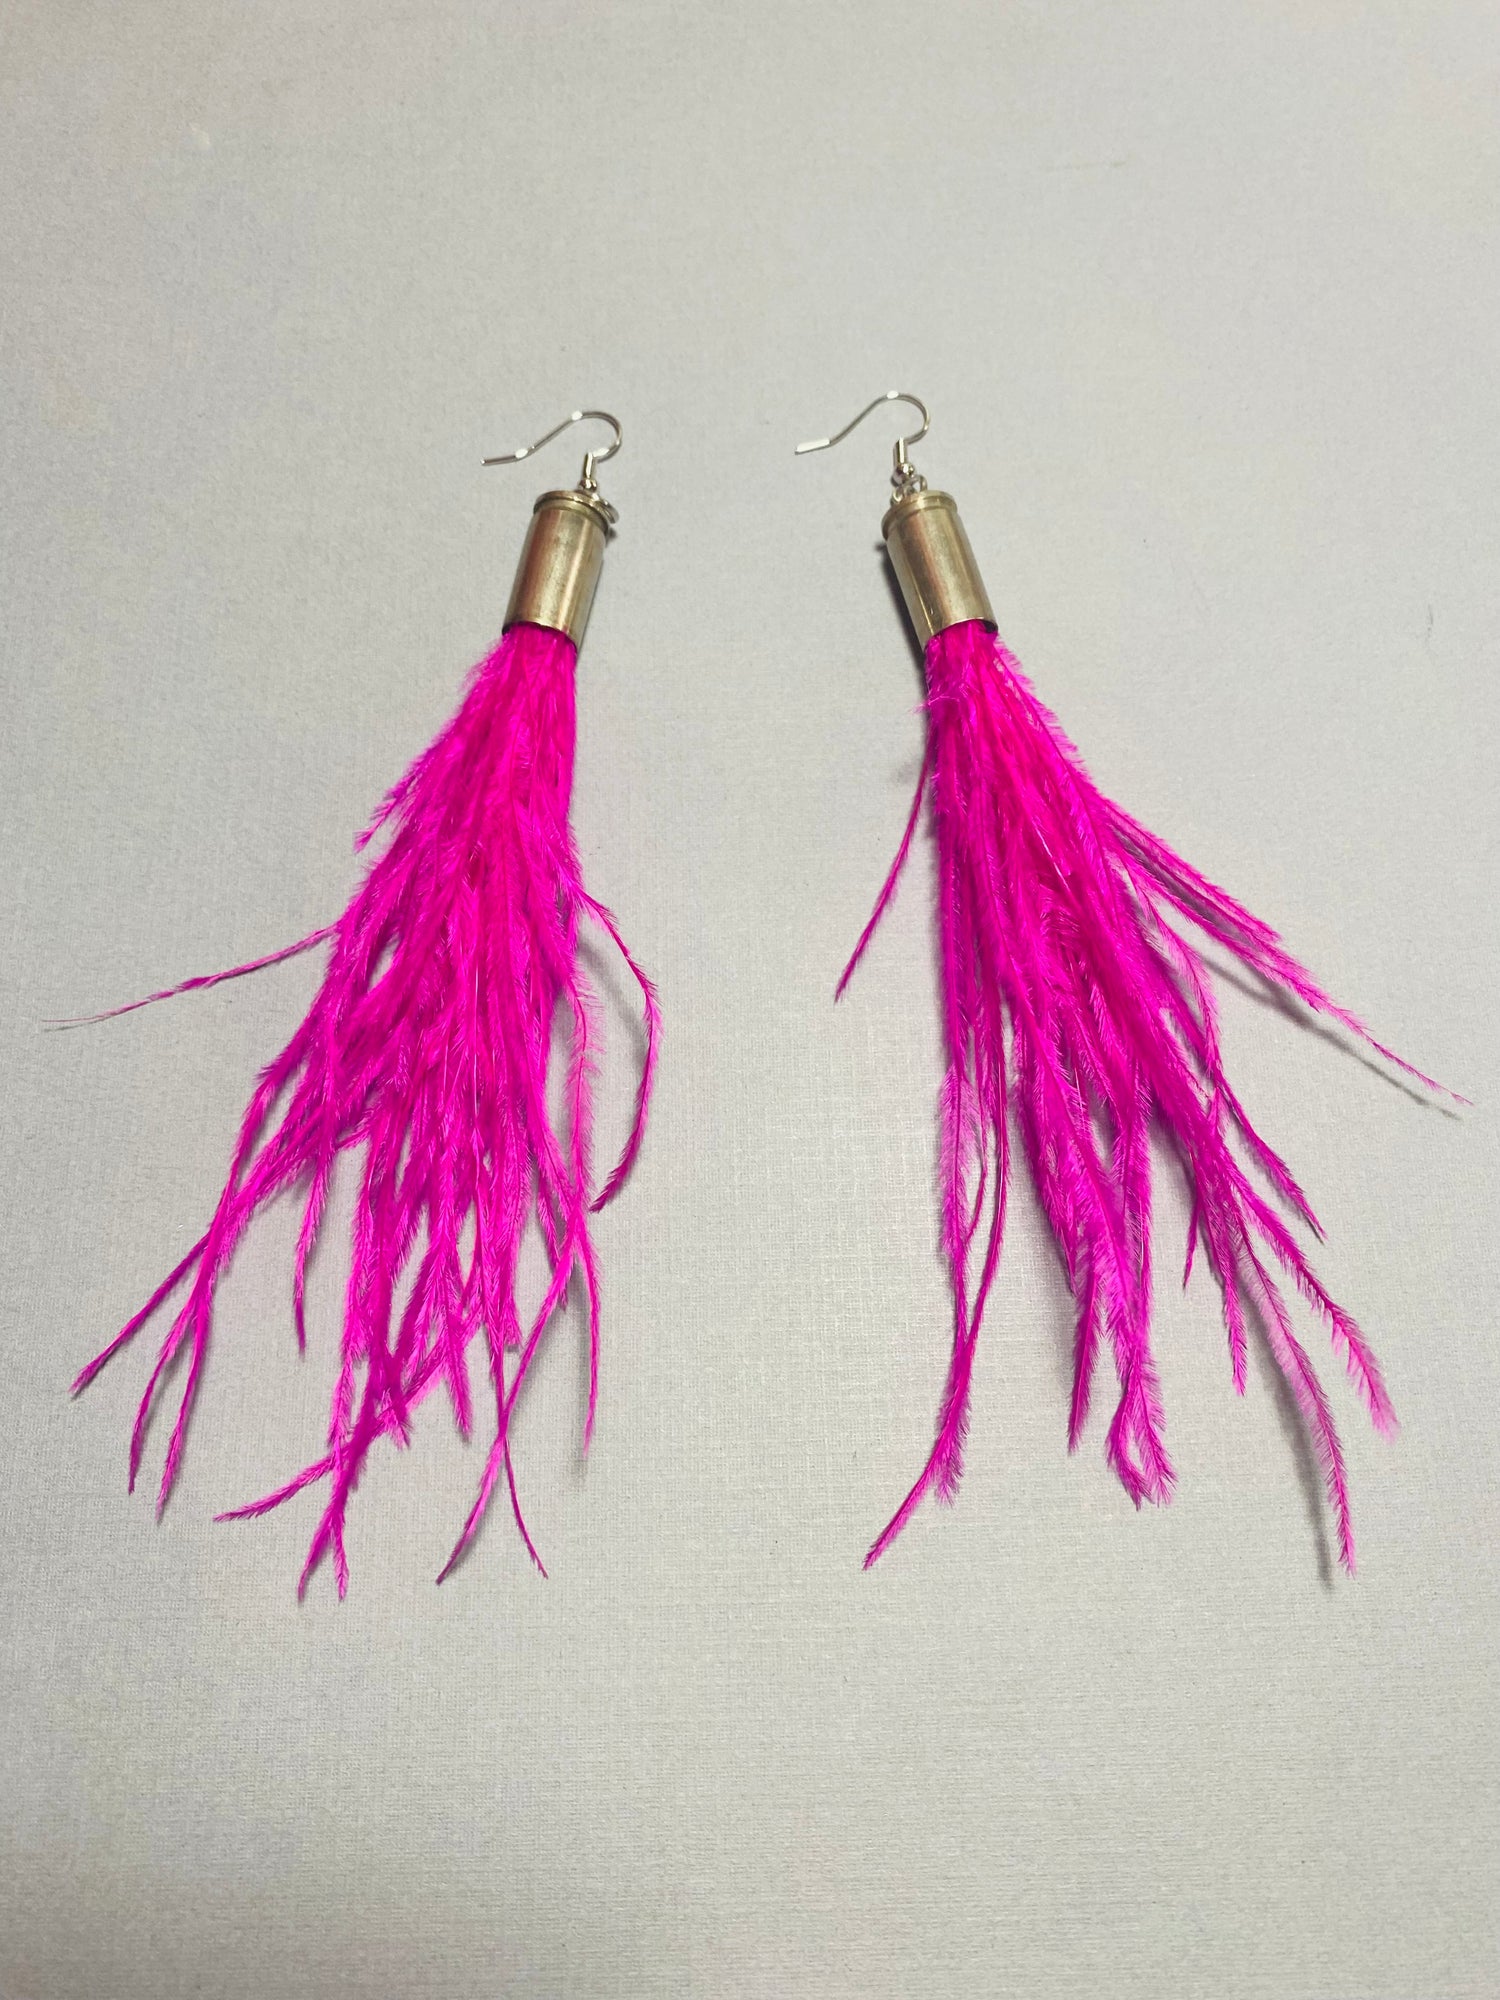 Feather Earrings | Handmade by Libby & Smee